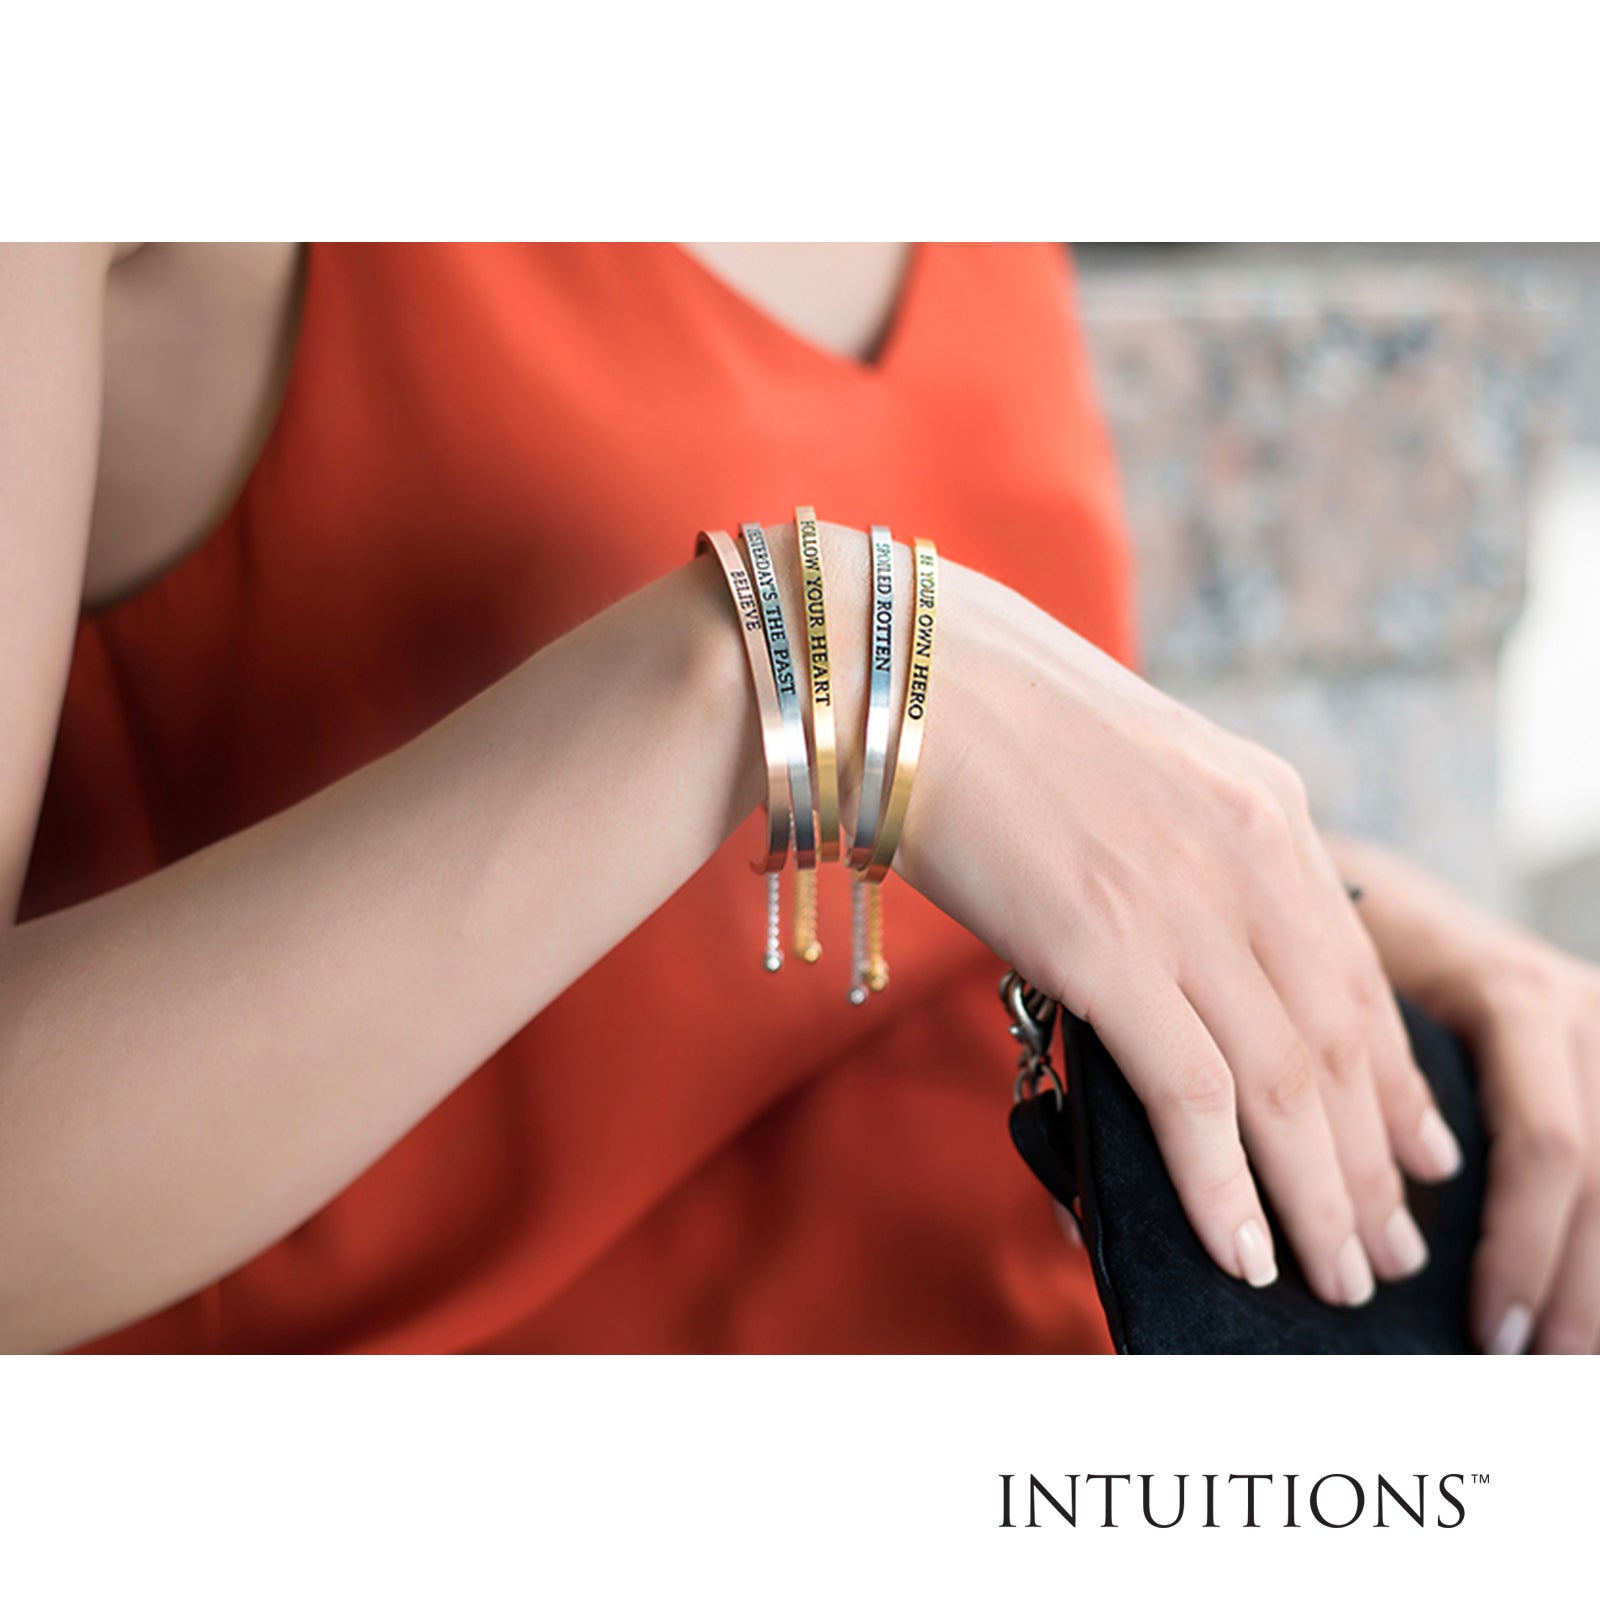 Intuitions Stainless Steel DON’T LOOK BACK Diamond Accent Cuff Bangle Bracelet